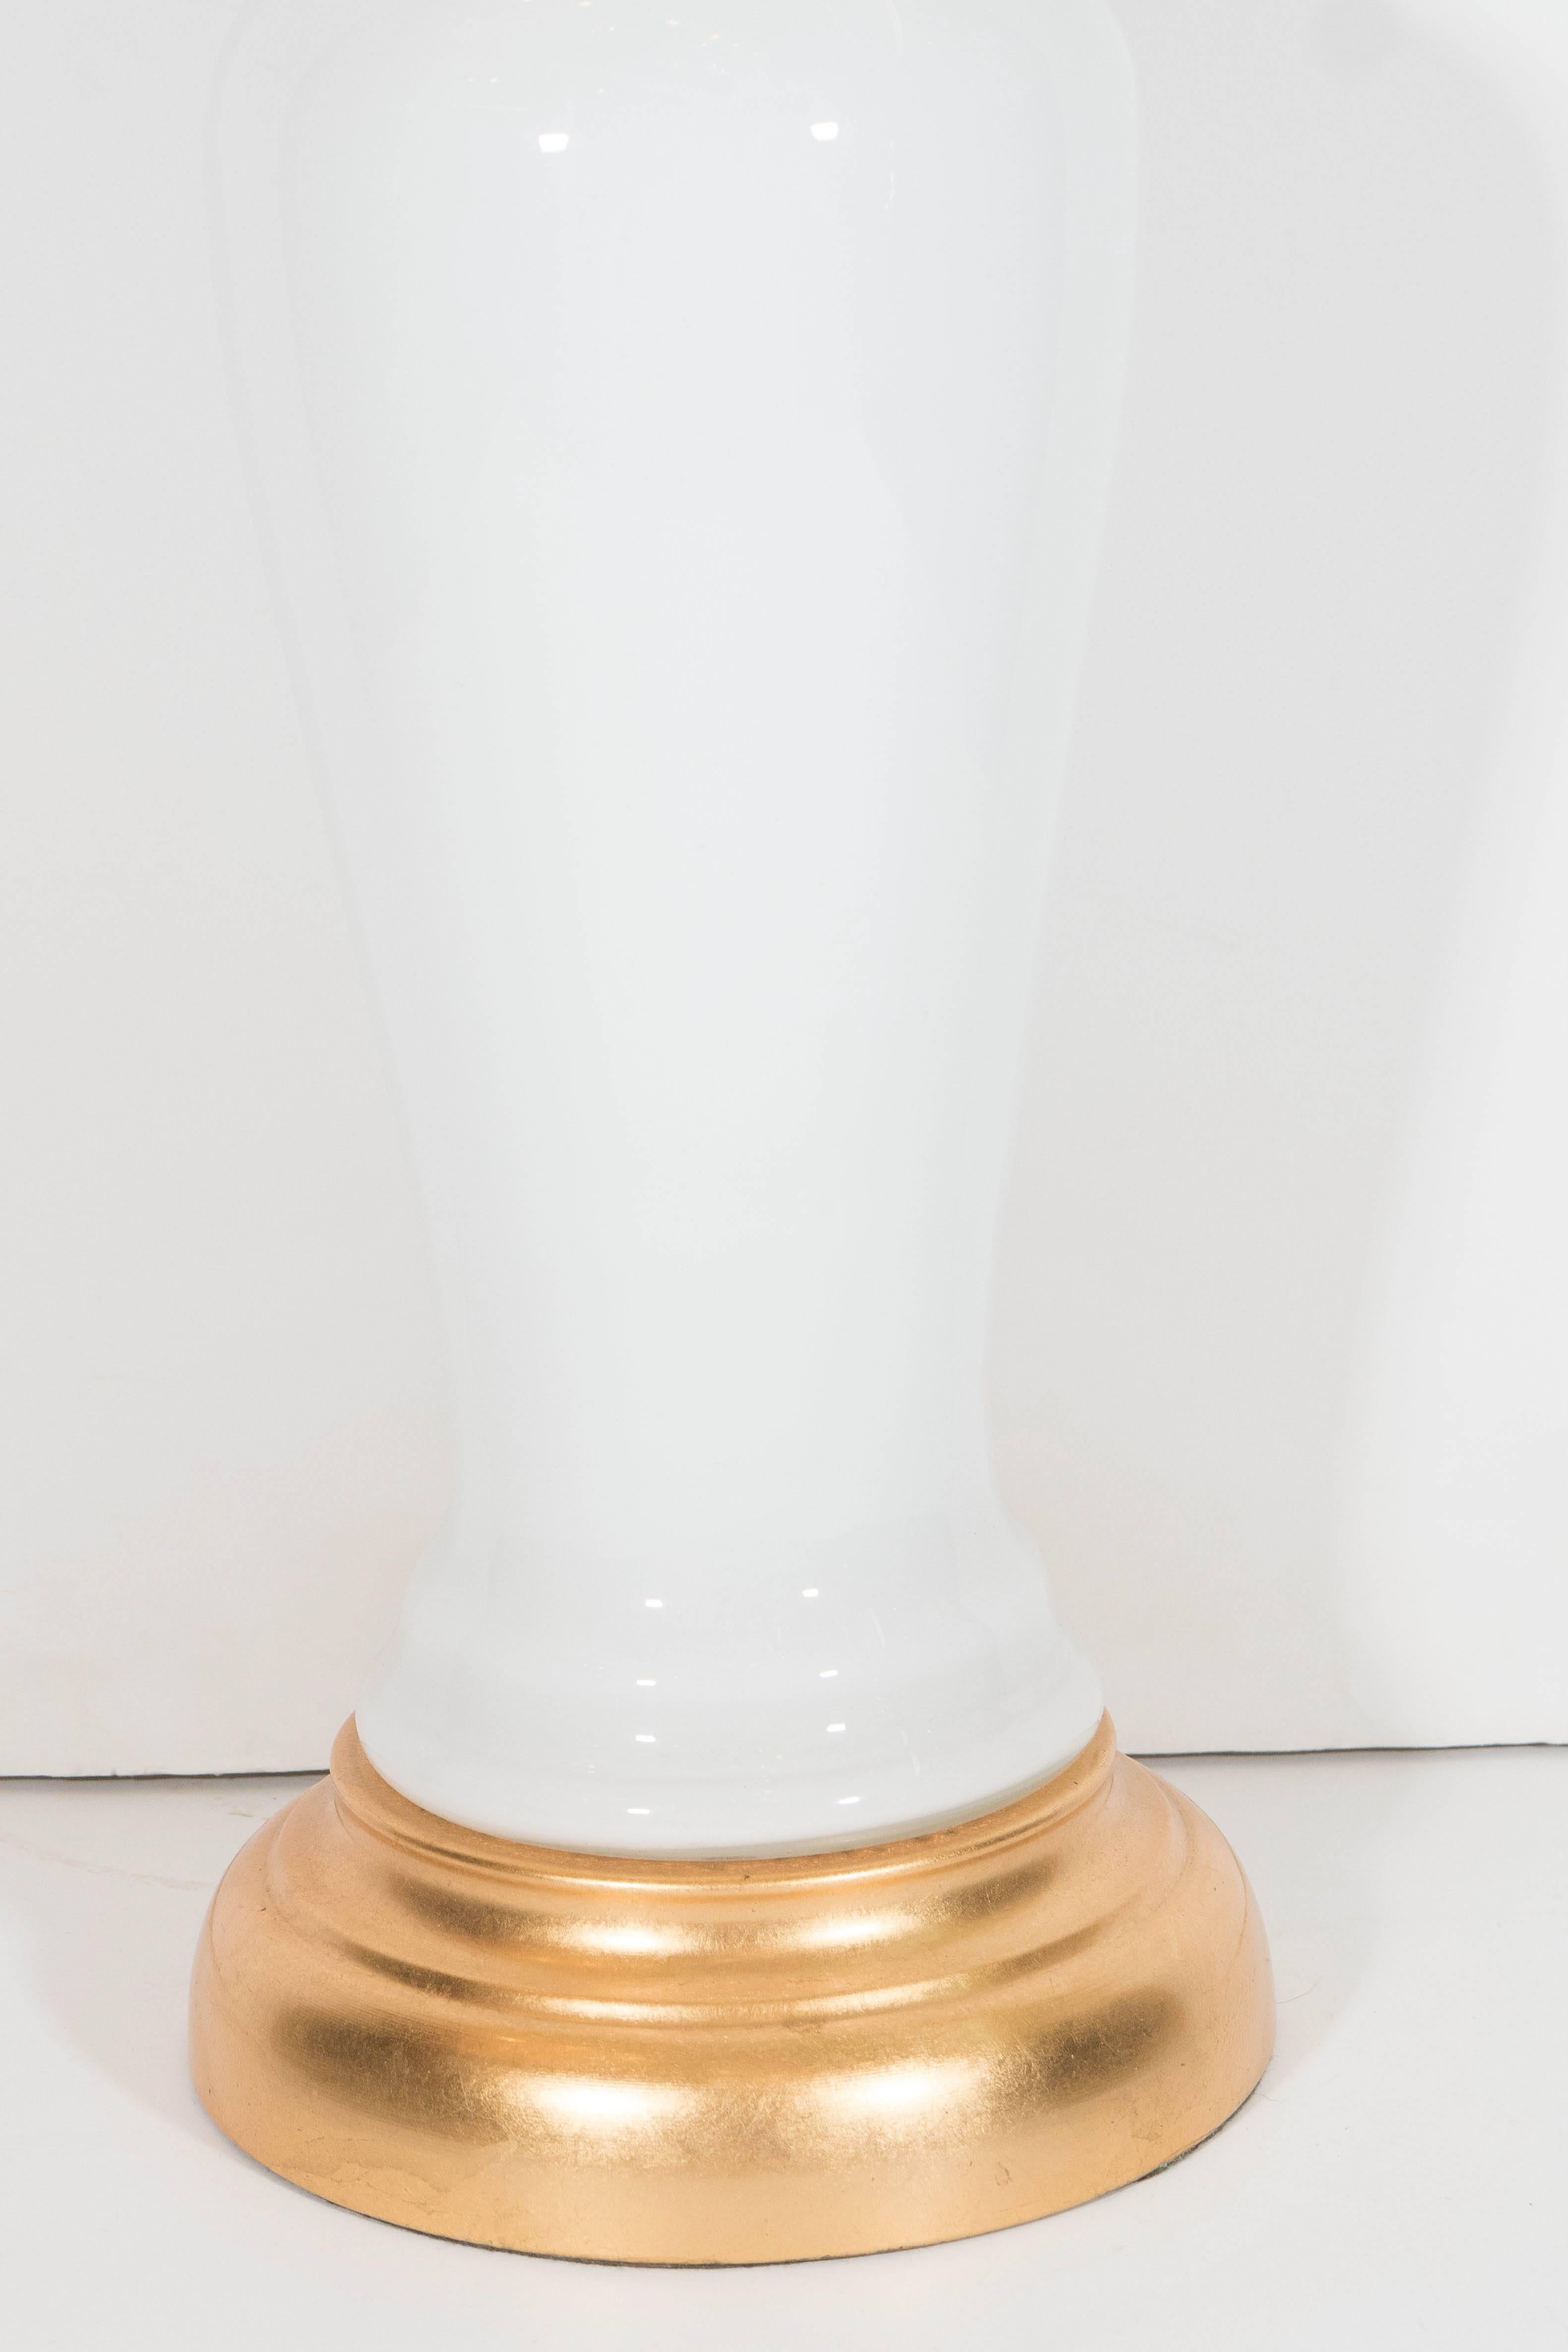 A pair of vintage white opaline glass lamps, each including a single socket, with baluster form bodies on gilded bases. Wiring and sockets to US standard, each requires a single Edison base bulb. Dimensions reflected do not include the shade. Very